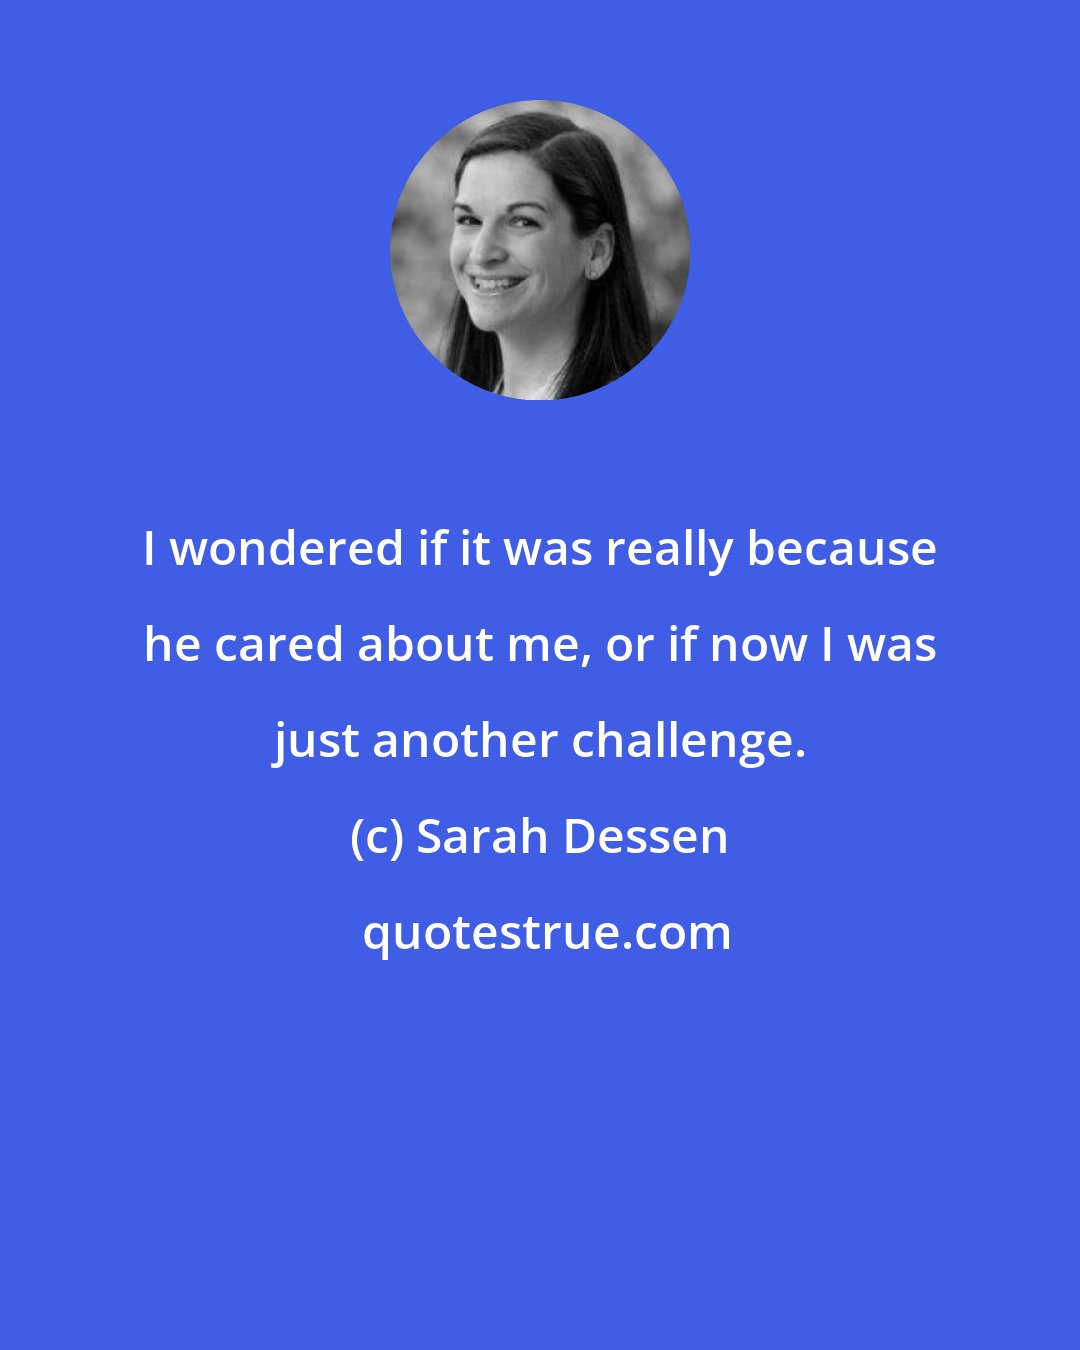 Sarah Dessen: I wondered if it was really because he cared about me, or if now I was just another challenge.